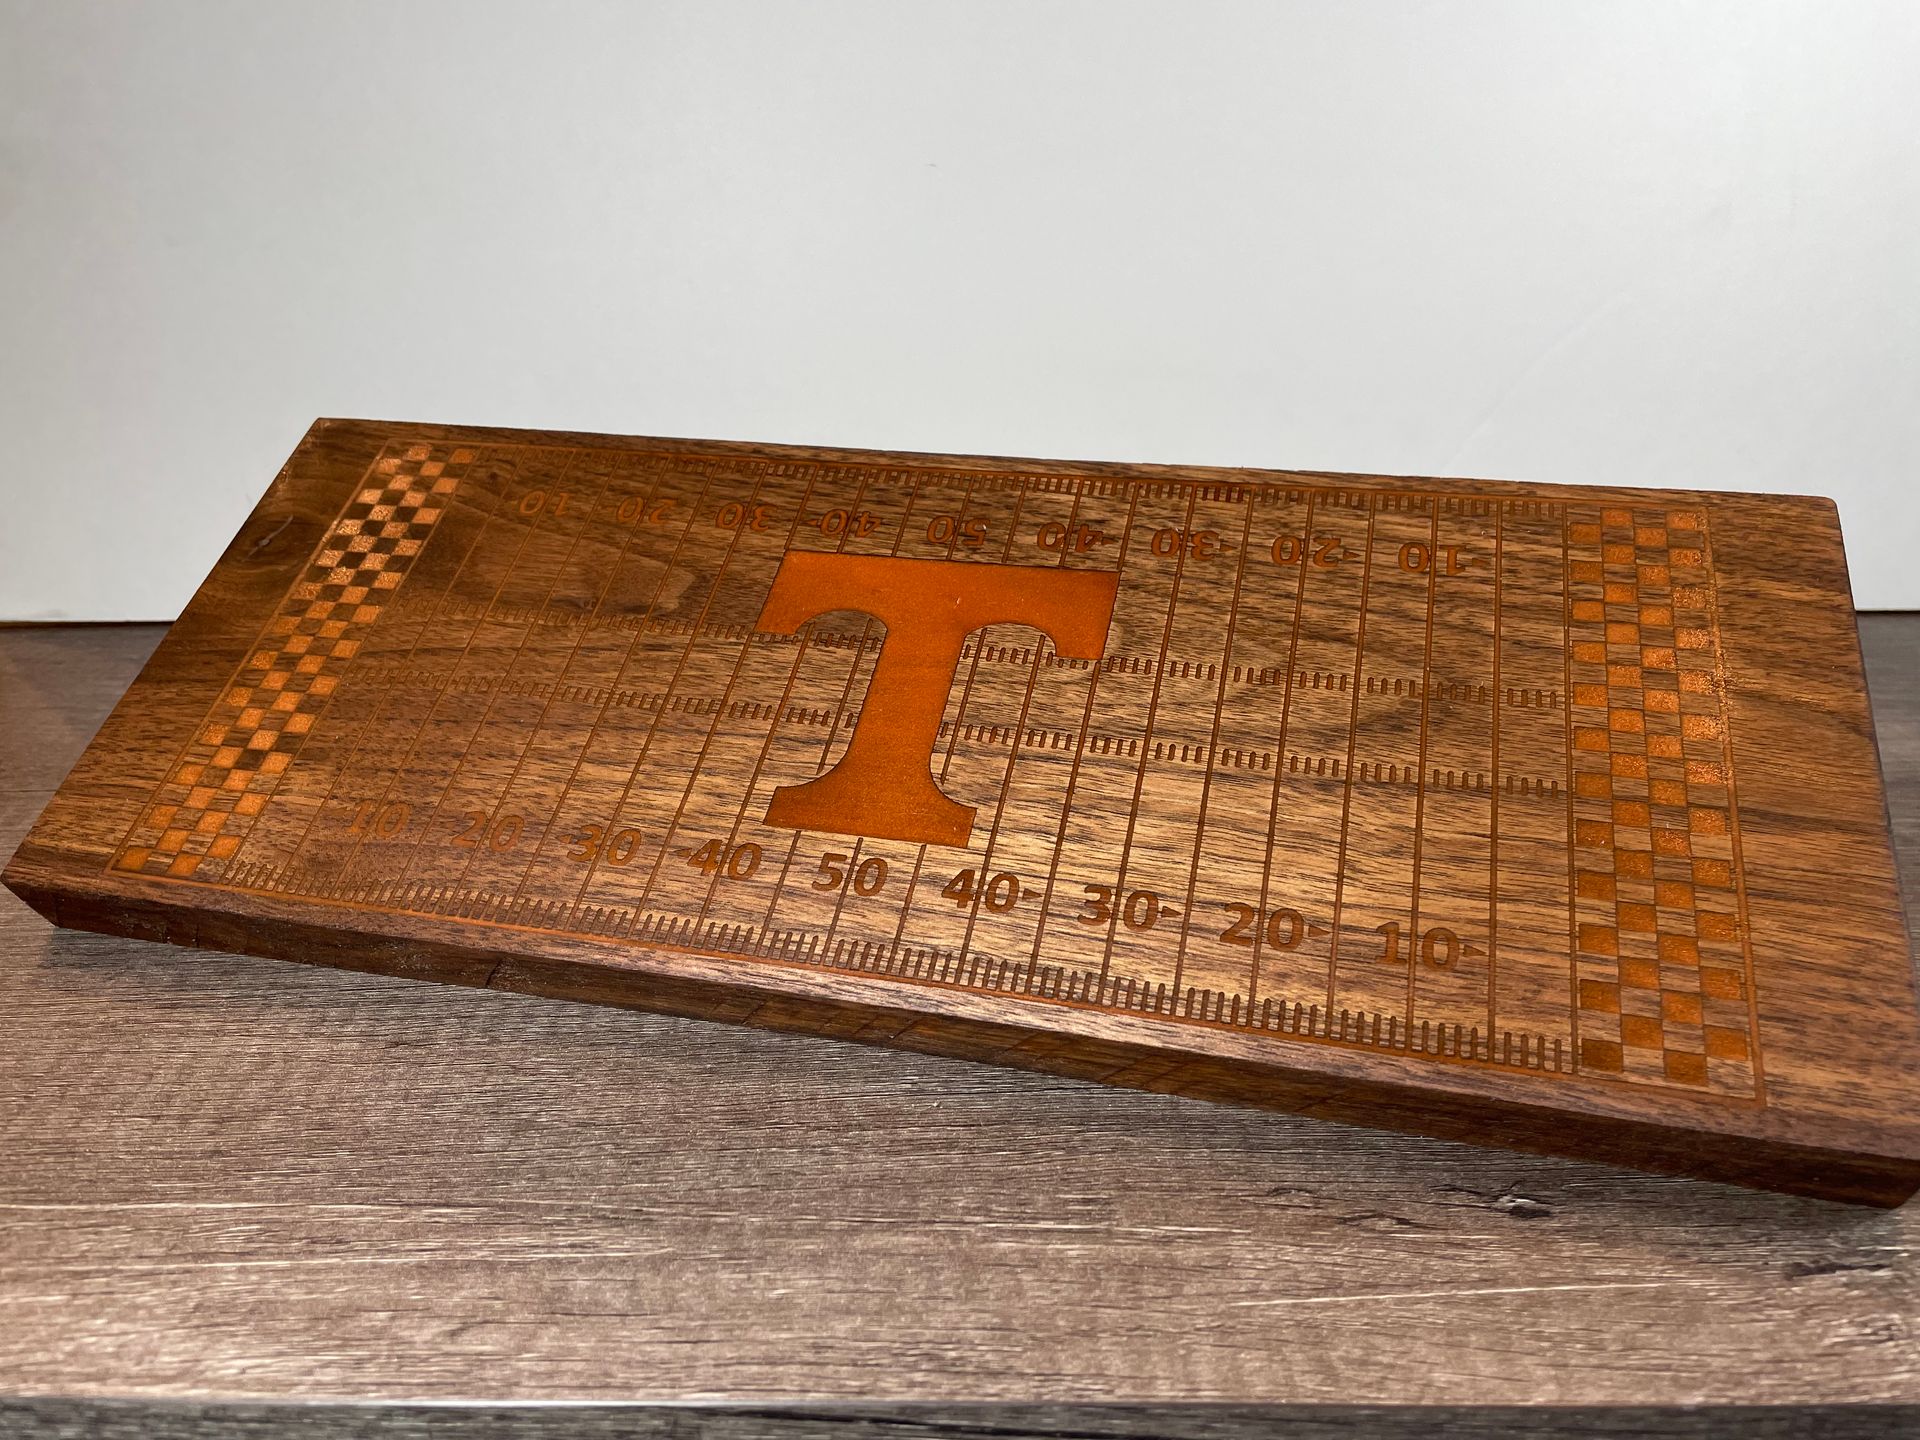 A wooden cutting board with the letter t on it is sitting on a table.